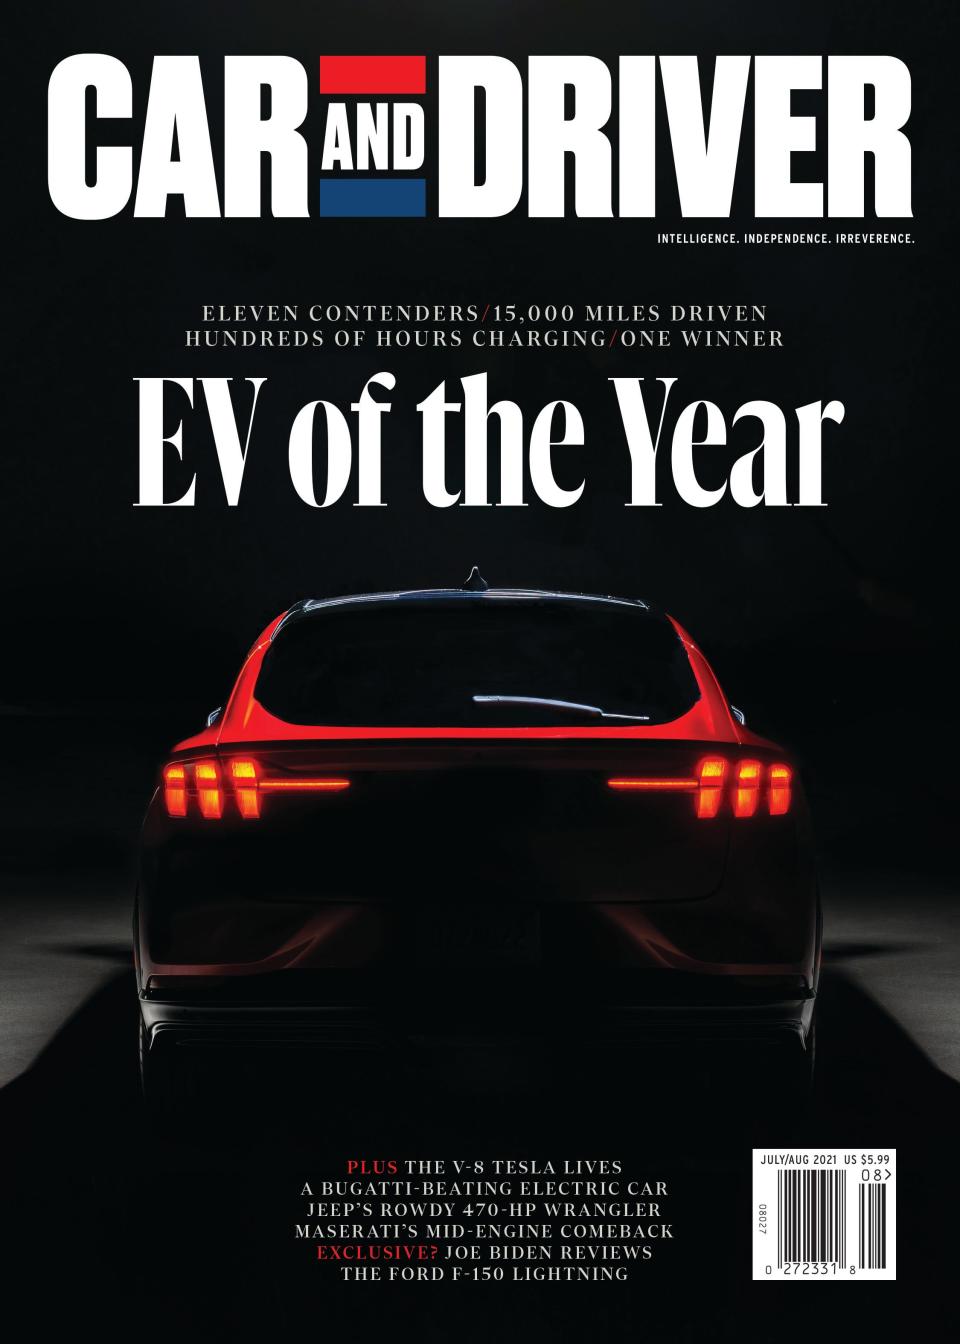 Car and Driver magazine, a respected leader in the automotive industry, named the Mustang Mach-E "EV of the Year" in the July/August 2021 issue.